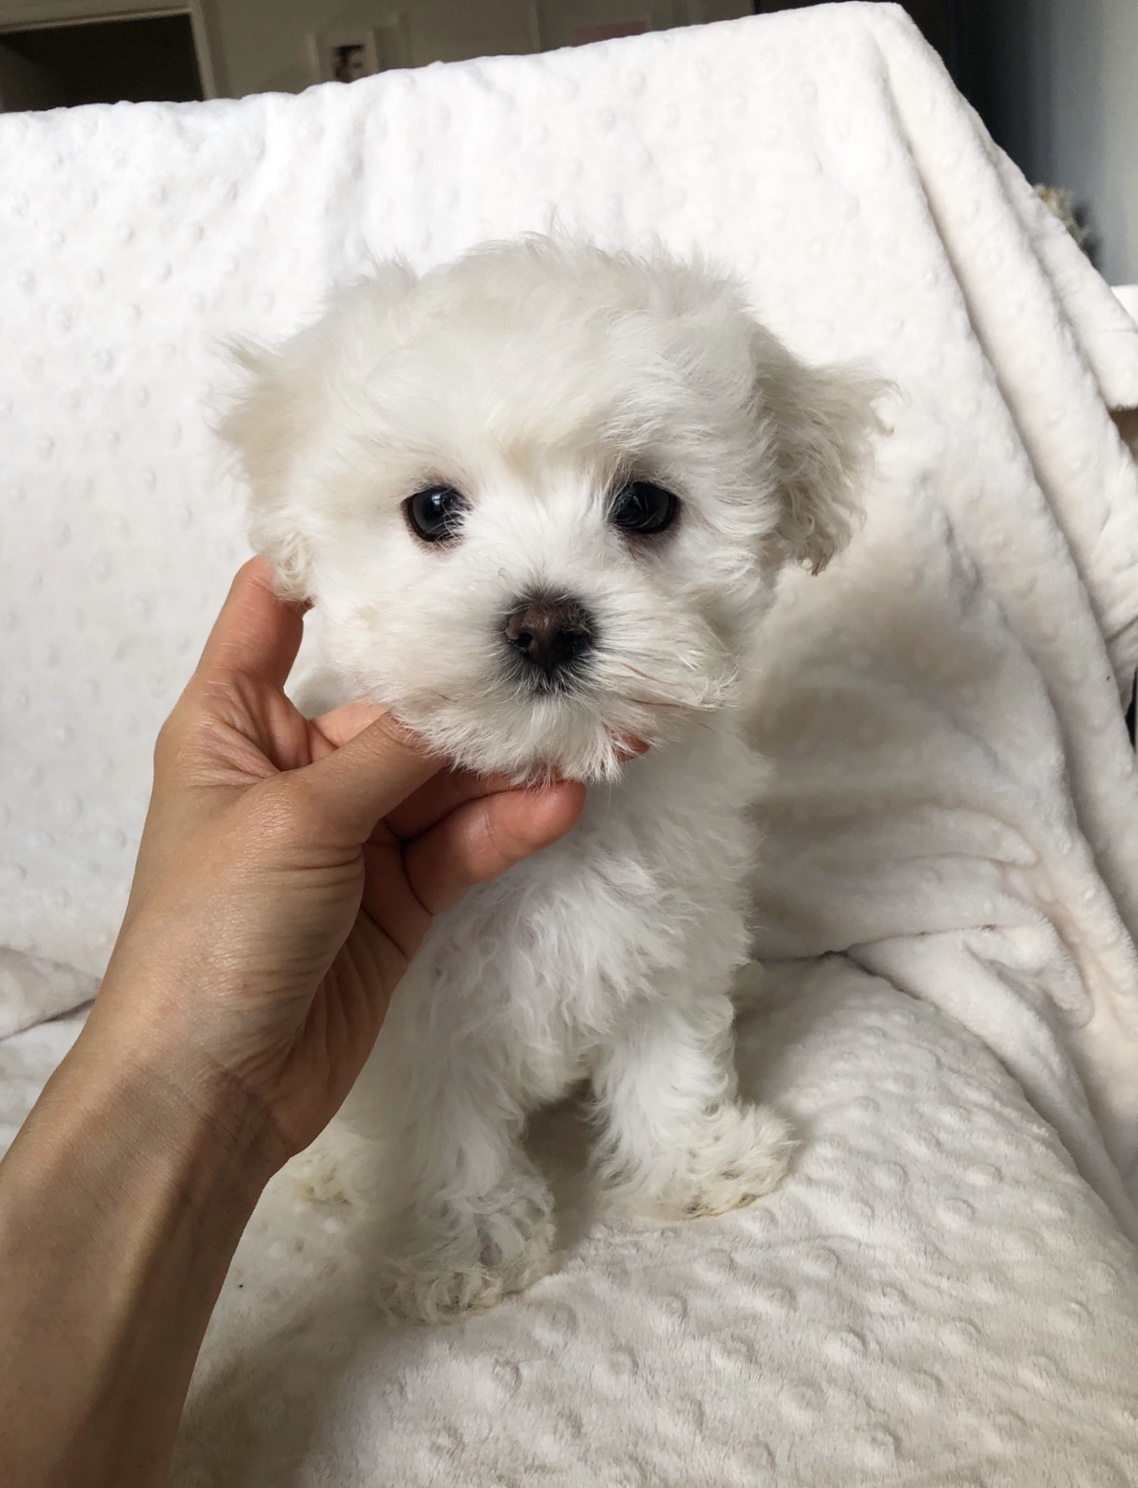 Teddy bear boy Matlese Poodle Puppy for sale! | iHeartTeacups